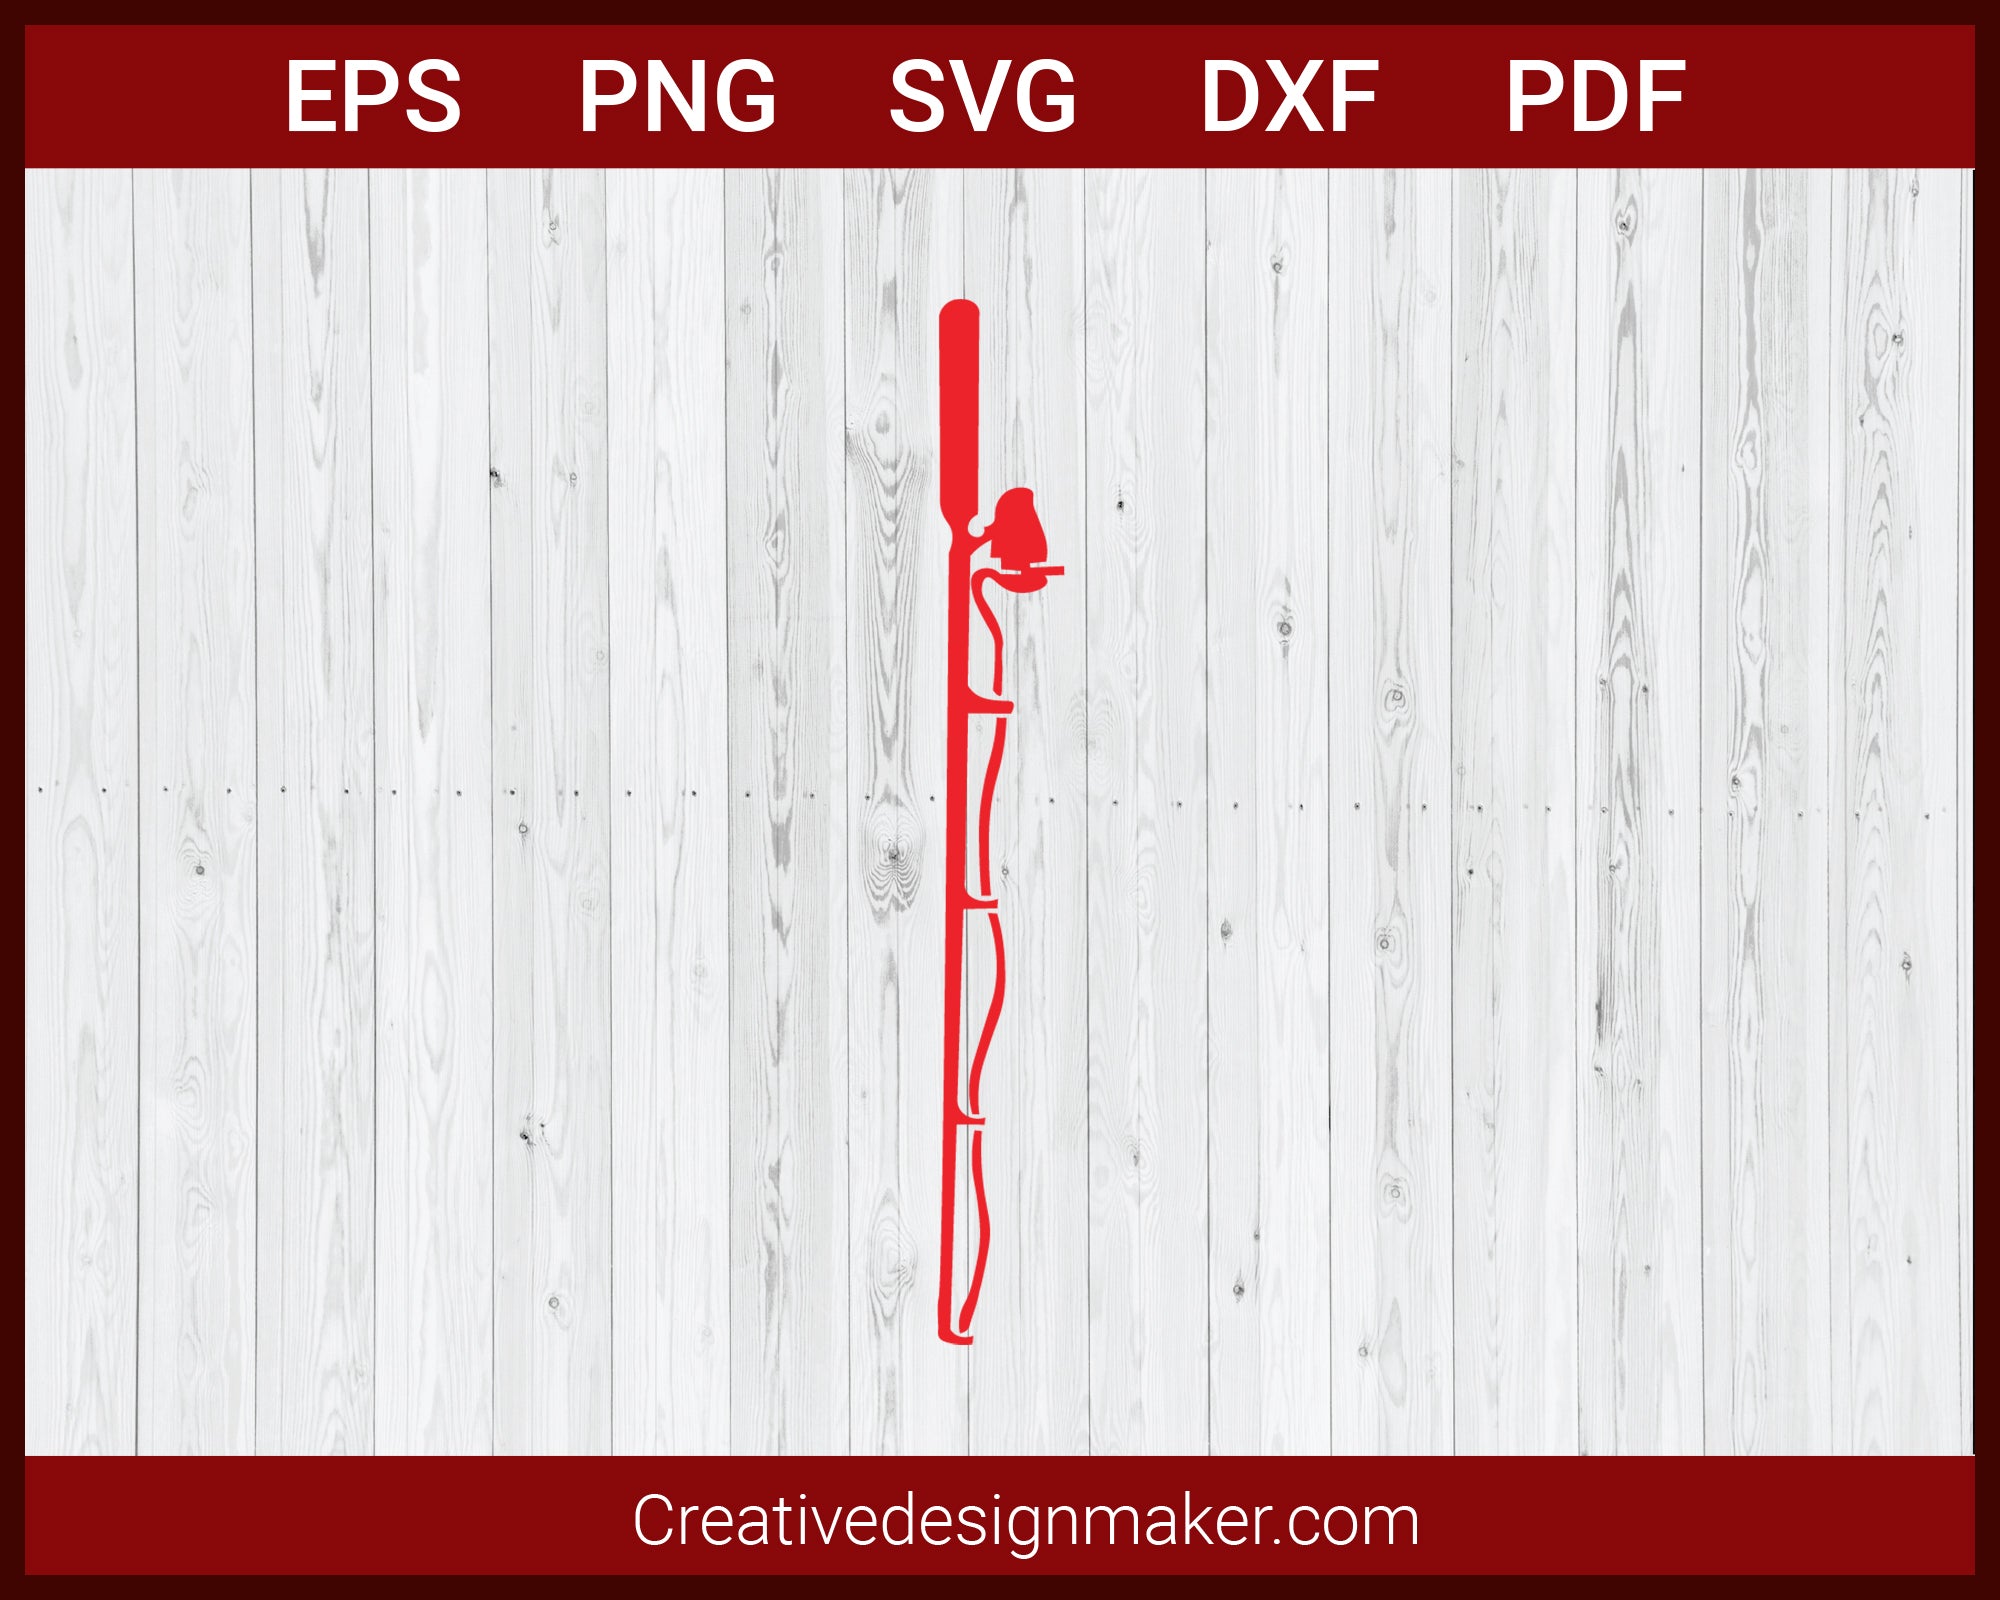 Download Fishing Rod Fishing Pole Svg Cricut Silhouette Dxf Png Eps Cut File Creativedesignmaker